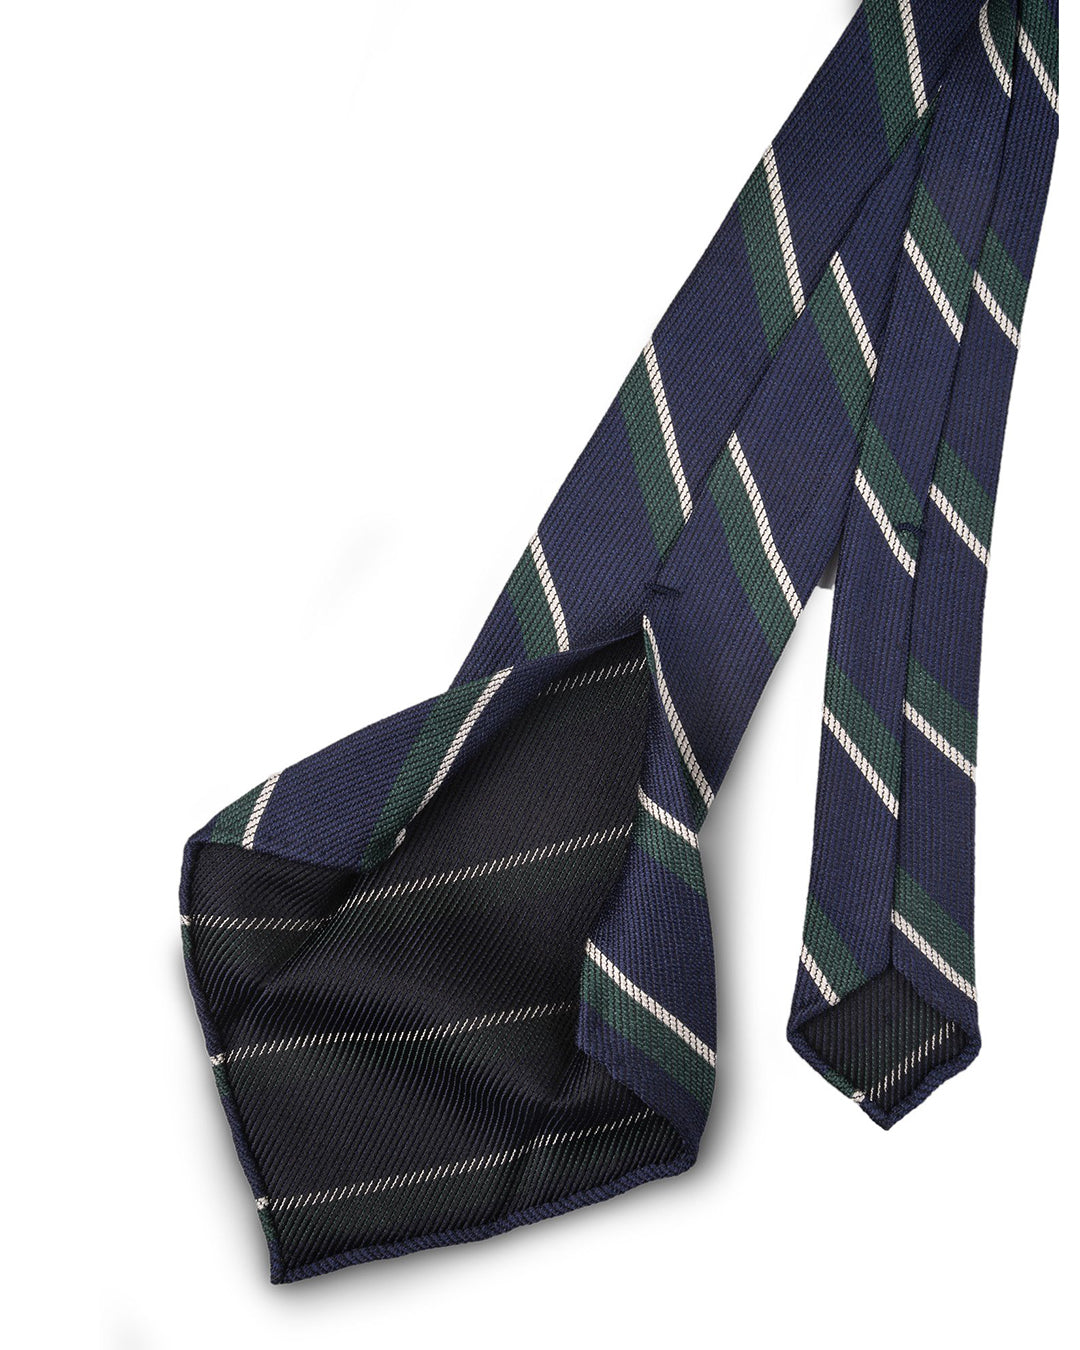 Classic Green Striped Navy Tie